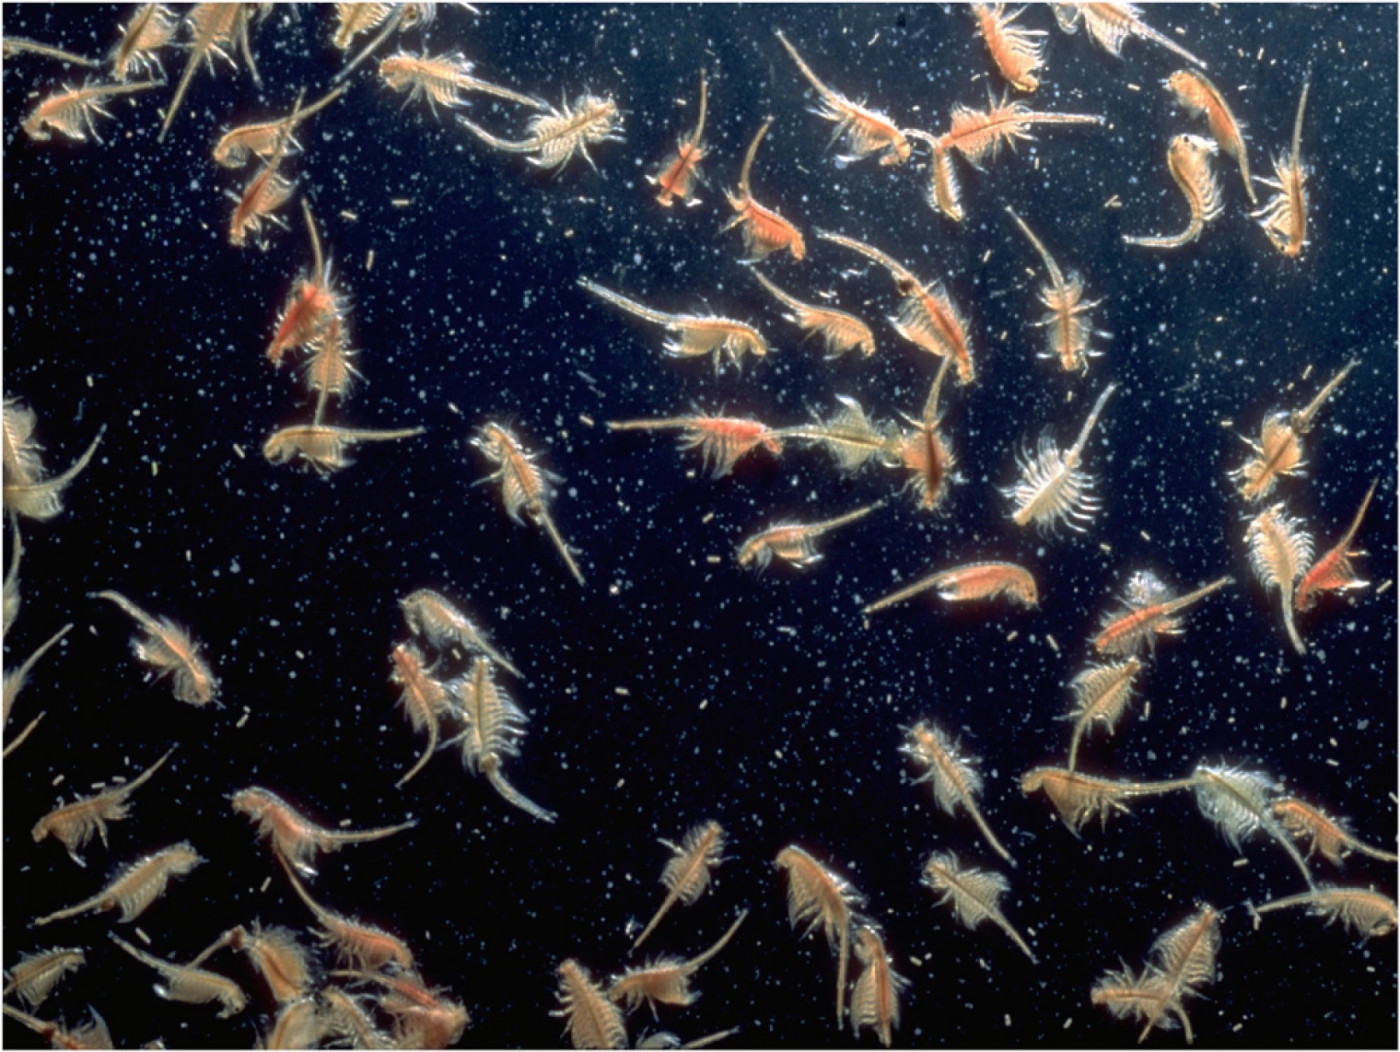 Artemia, small but influential - Shrimps